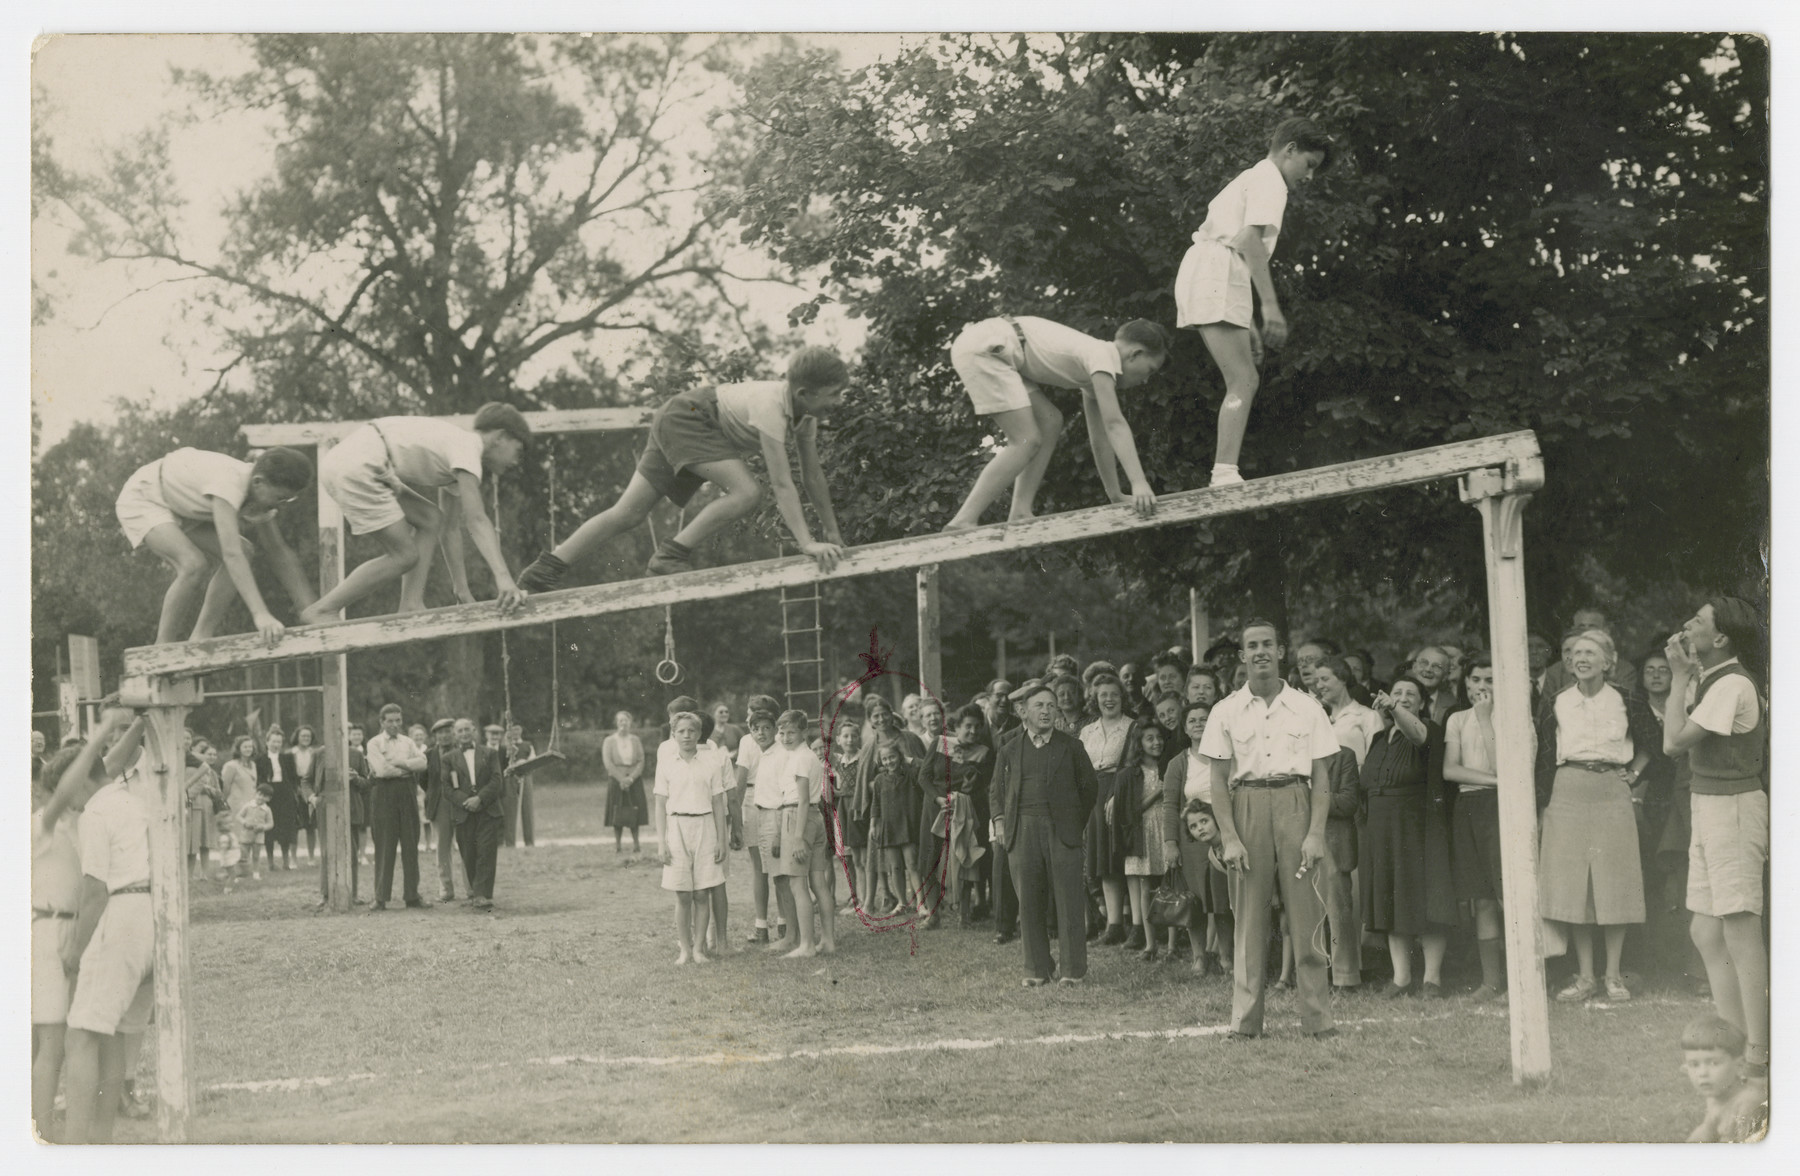 Internees participate in a sports day at the Vittel internment camp for foreign nationals.